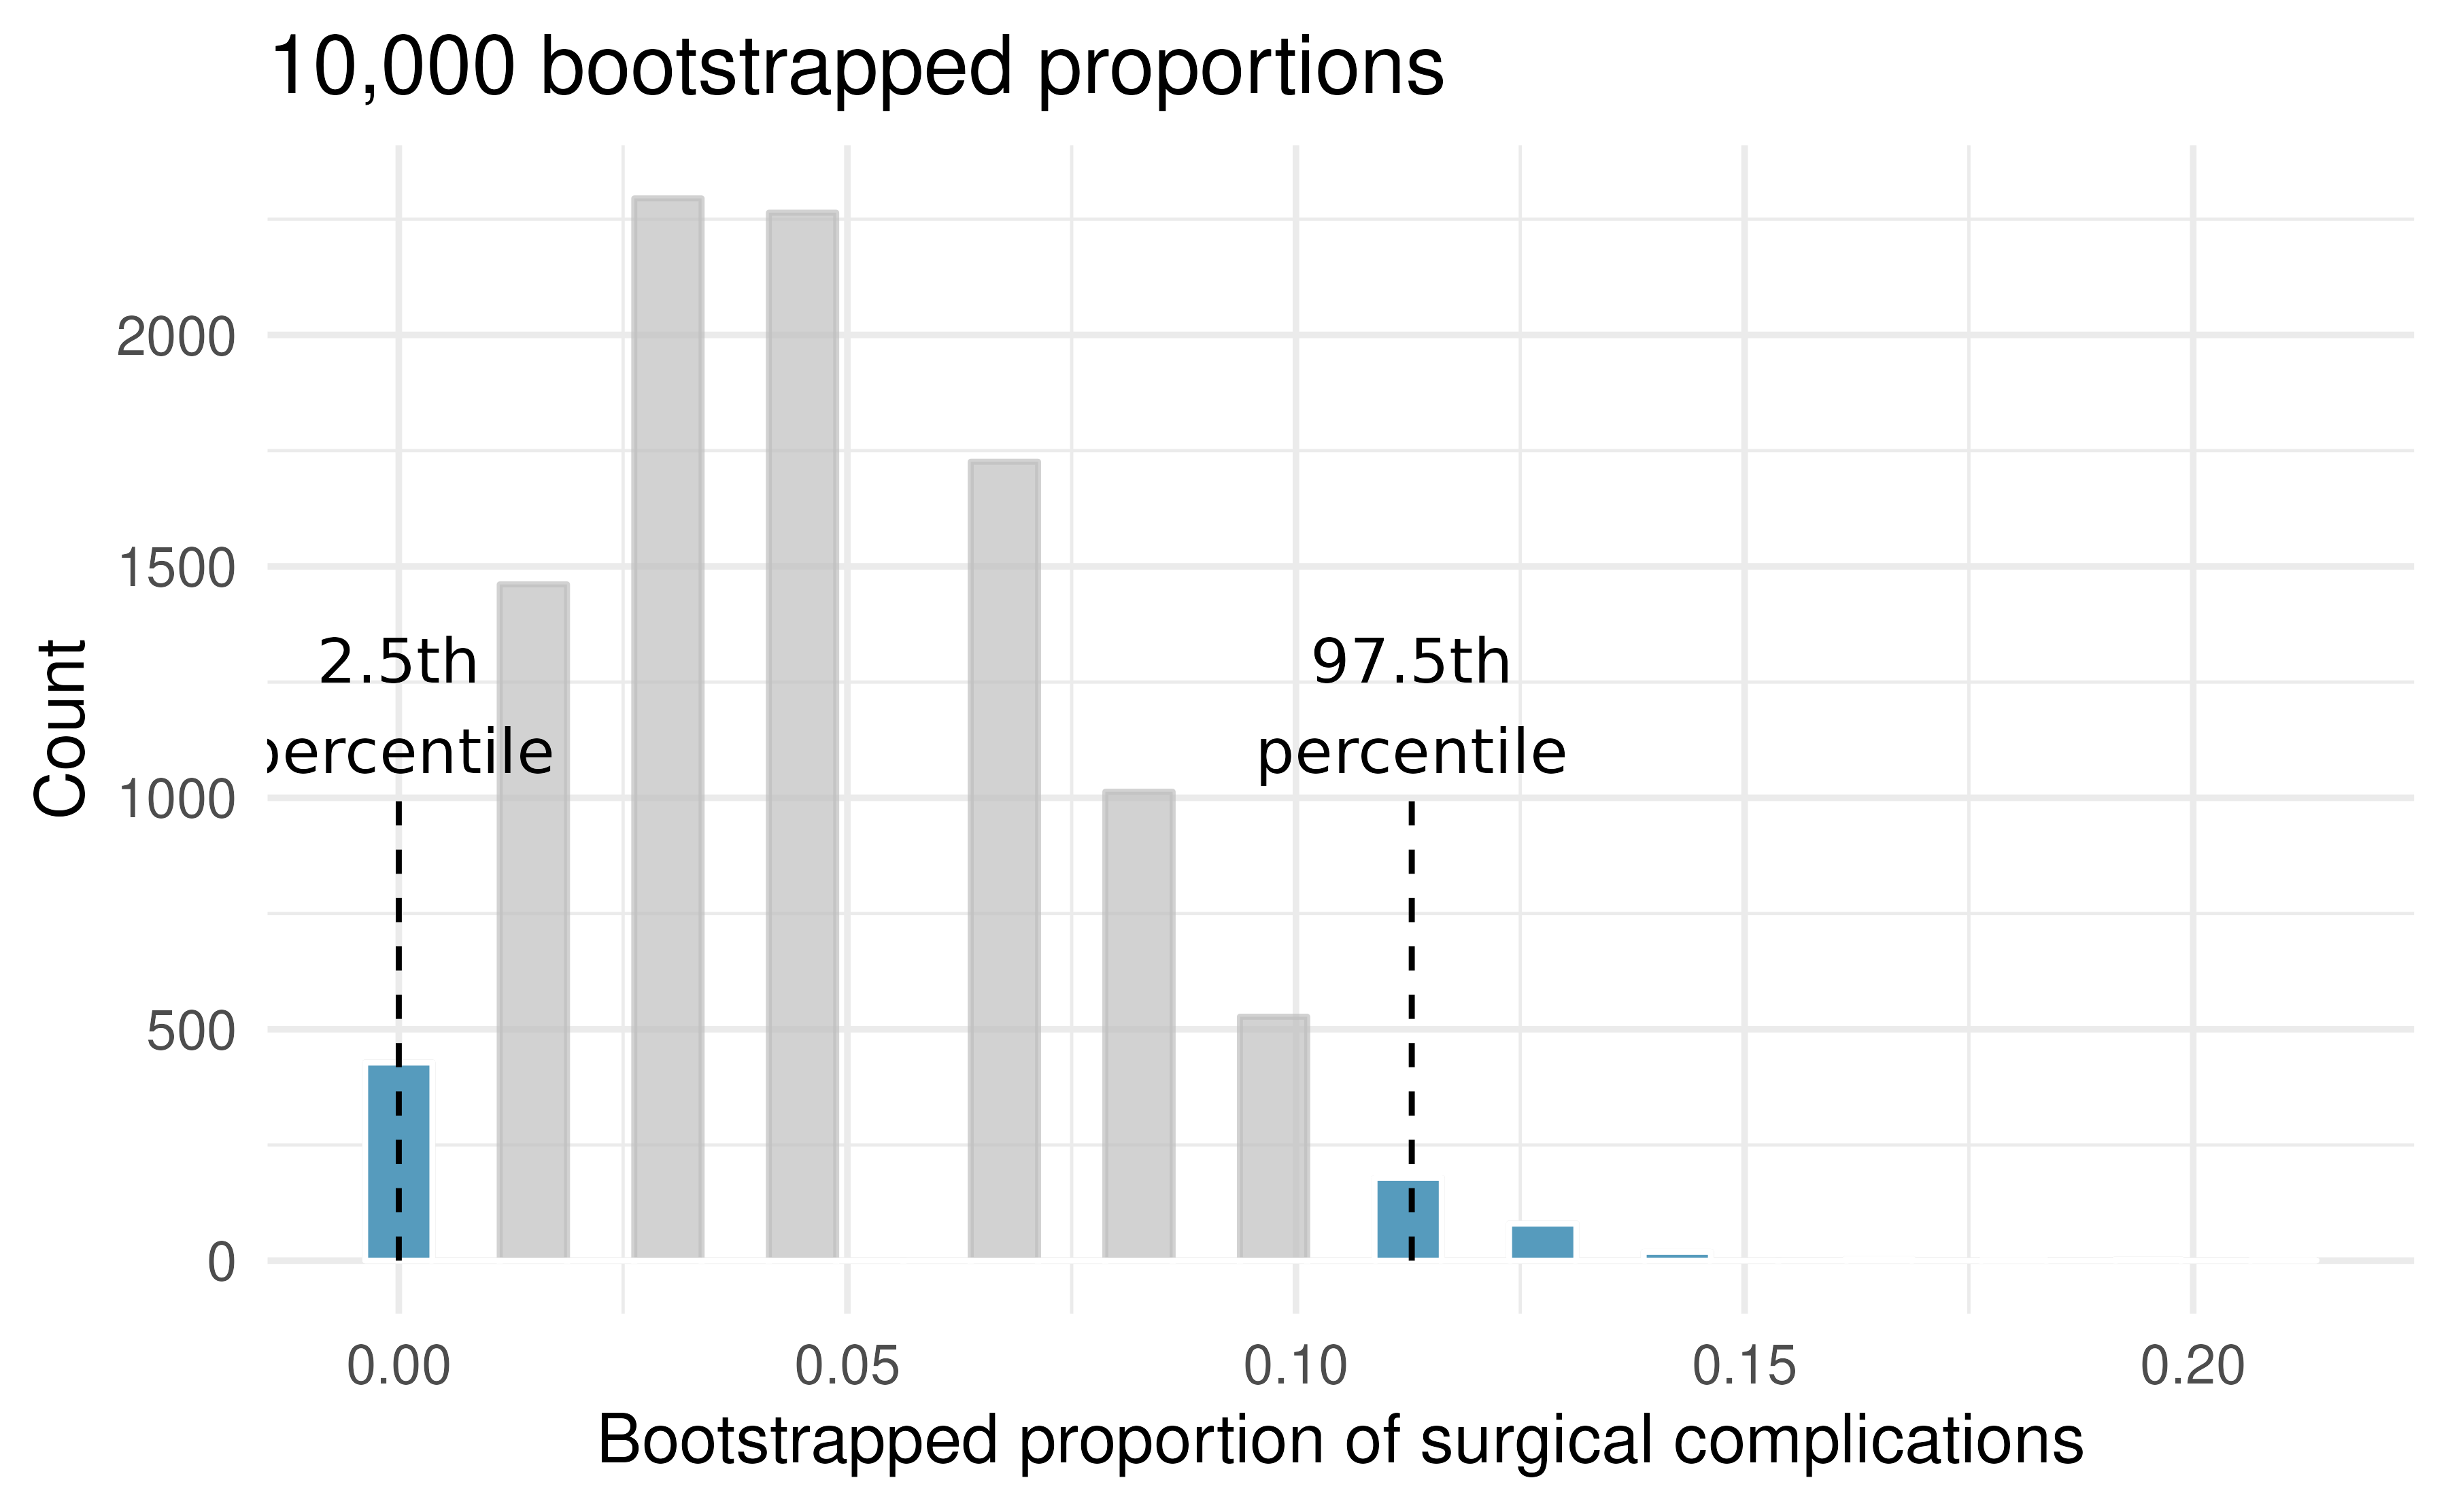 The original medical consultant data is bootstrapped 10,000 times. Each simulation creates a sample from the original data where the probability of a complication is \(\hat{p} = 3/62.\) The bootstrap 2.5 percentile proportion is 0 and the 97.5 percentile is 0.113. The result is: we are confident that, in the population, the true probability of a complication is between 0% and 11.3%.